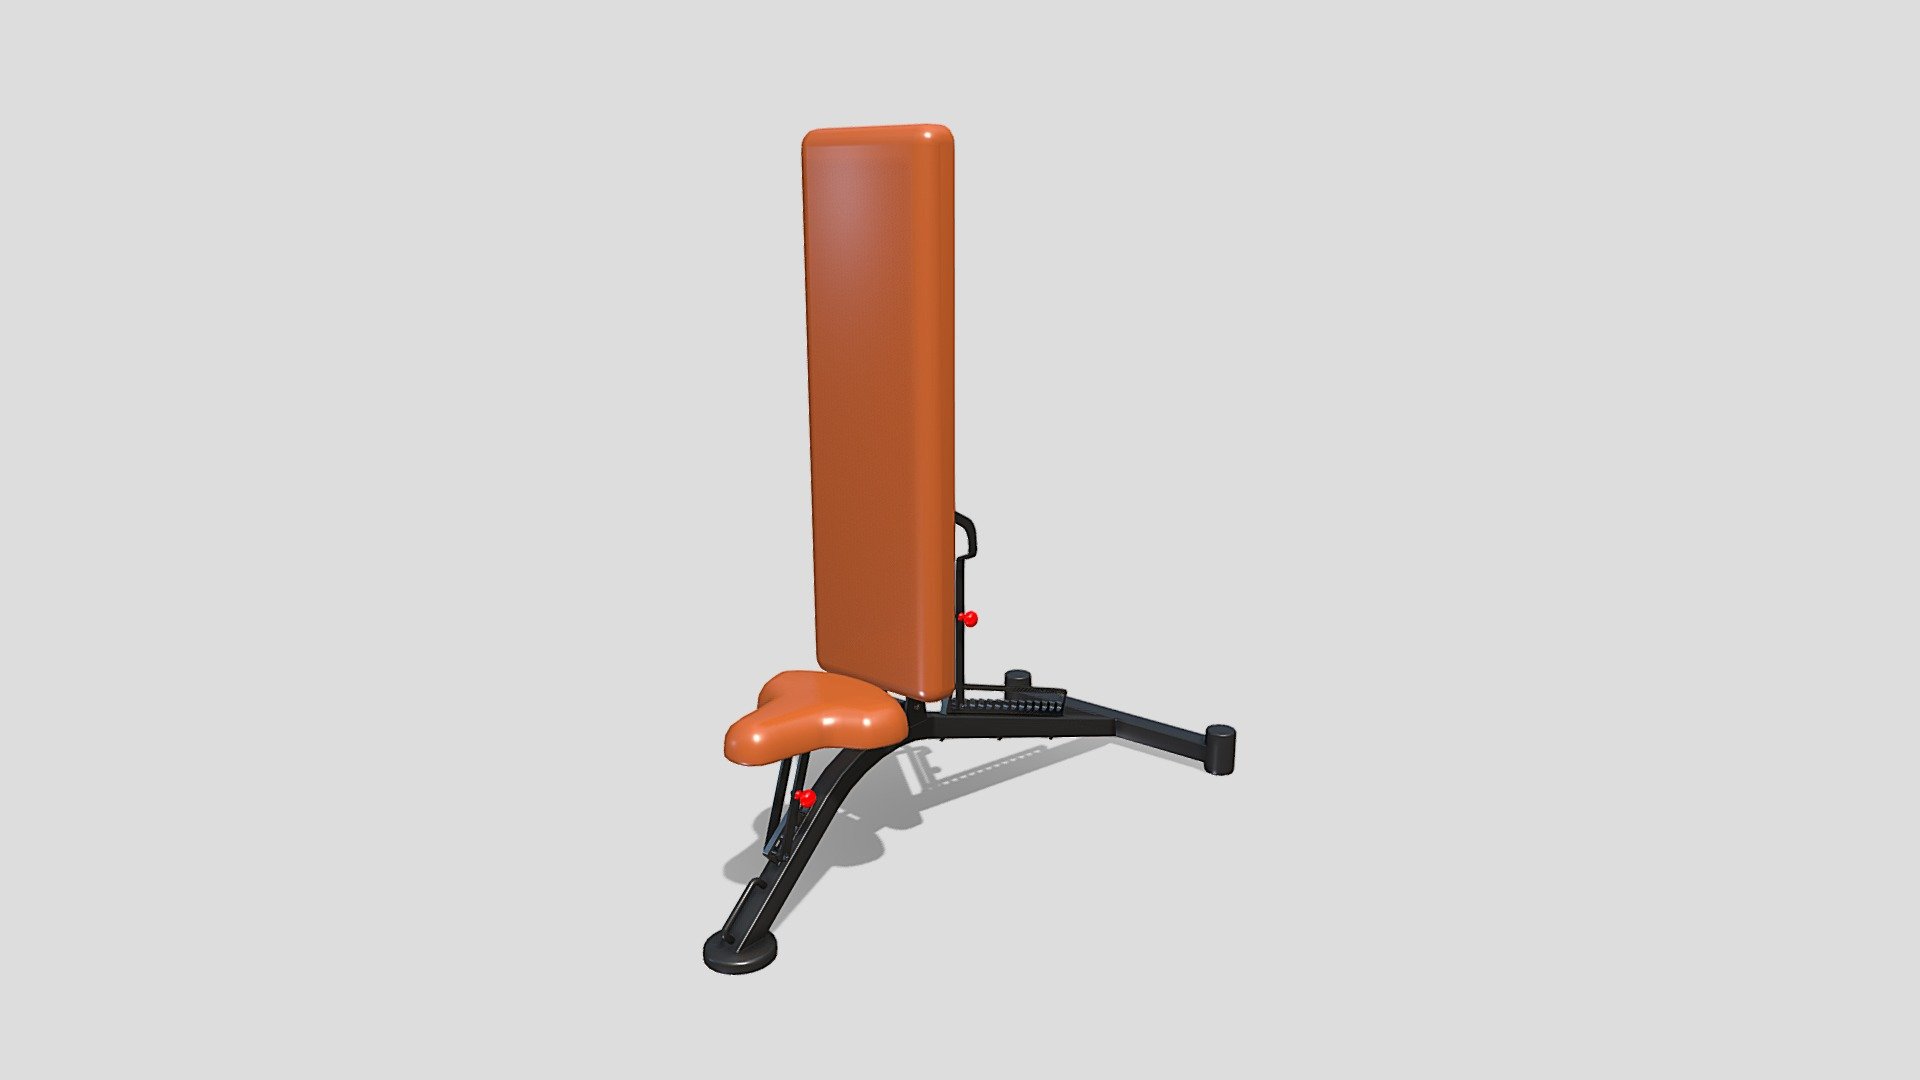 Gym machine 3d model built to real size, rendered with Cycles in Blender, as per seen on attached images. 

File formats:
-.blend, rendered with cycles, as seen in the images;
-.obj, with materials applied;
-.dae, with materials applied;
-.fbx, with materials applied;
-.stl;

Files come named appropriately and split by file format.

3D Software:
The 3D model was originally created in Blender 3.1 and rendered with Cycles.

Materials and textures:
The models have materials applied in all formats, and are ready to import and render.
Materials are image based using PBR, the model comes with four 4k png image textures.

Preview scenes:
The preview images are rendered in Blender using its built-in render engine &lsquo;Cycles'.
Note that the blend files come directly with the rendering scene included and the render command will generate the exact result as seen in previews.

General:
The models are built mostly out of quads.

For any problems please feel free to contact me.

Don't forget to rate and enjoy! - Adjustable Bench - Buy Royalty Free 3D model by dragosburian 3d model